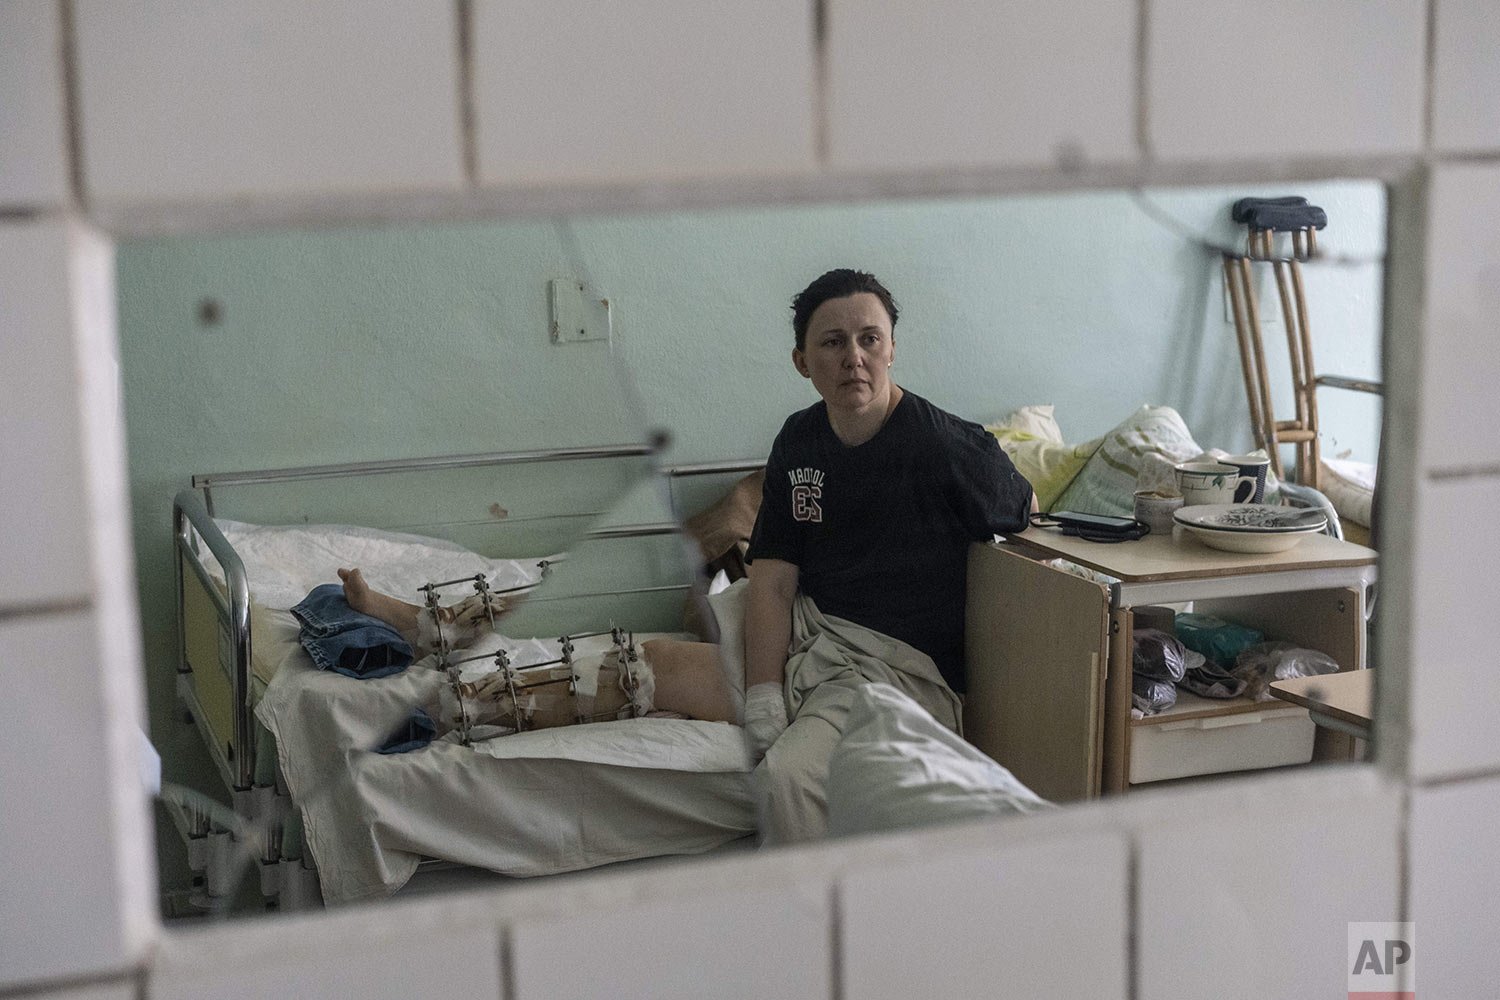  Natalya Vakula, 44, rests in a hospital in Brovary, on the outskirts of Kyiv, while recovering from injuries in her leg after a Russian attack in Chernihiv, Ukraine, Saturday, March 26, 2022. (AP Photo/Rodrigo Abd) 